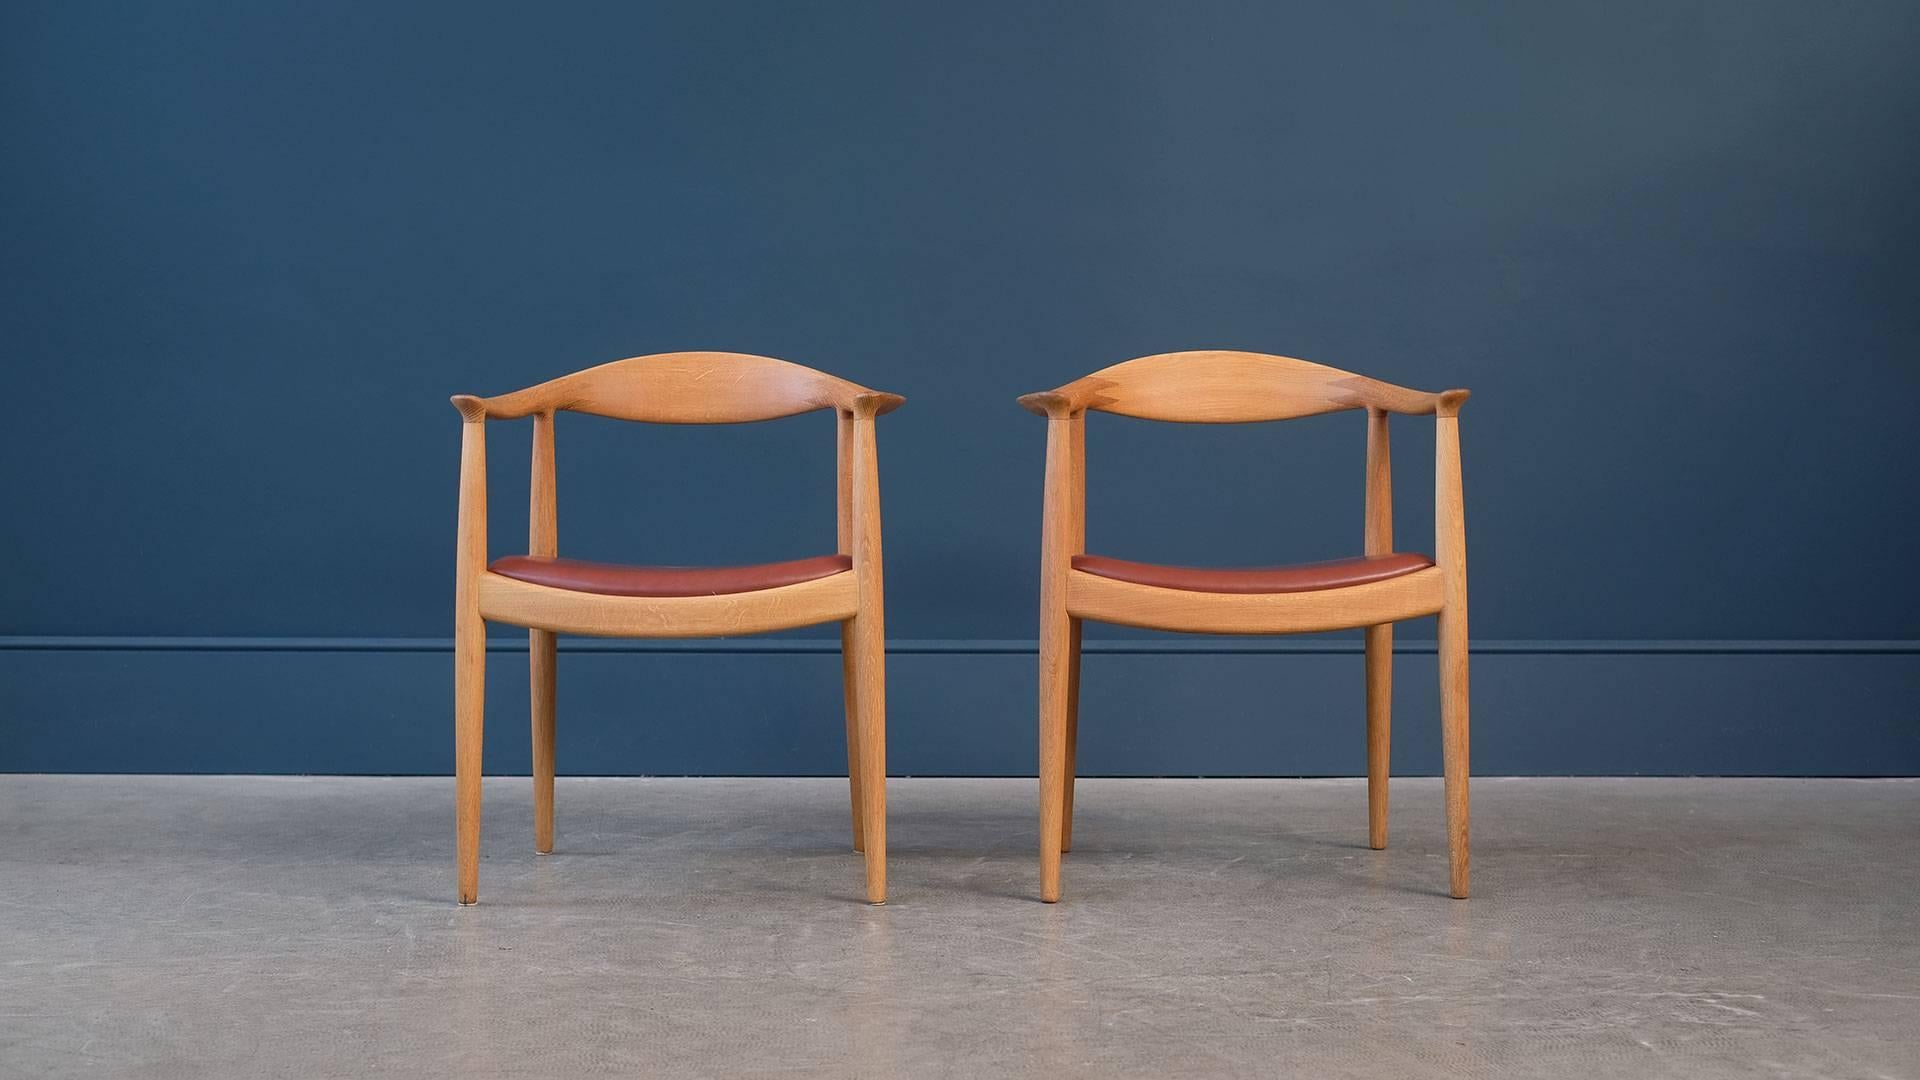 Pair of round chair in oak designed by Hans Wegner for cabinet maker Johannes Hansen, Denmark. Fabulous quality, details and ultra elegant design. This examples with new analine leather seat. The most famous of all Wegner pieces.